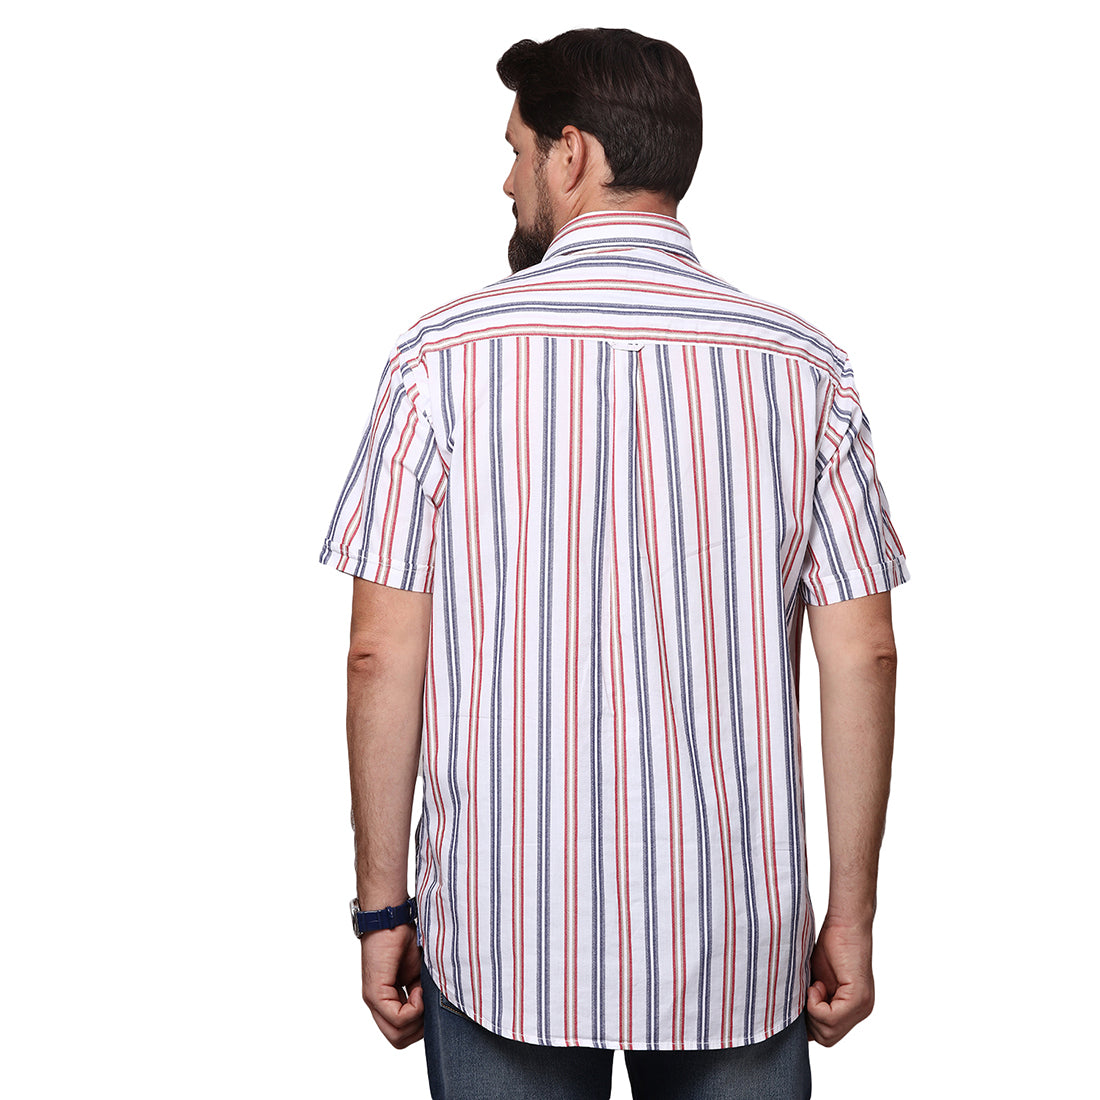 Big & Bold Stripes Multi Full Sleeves Slim Fit Casual Shirts (Plus Size) - Double Two